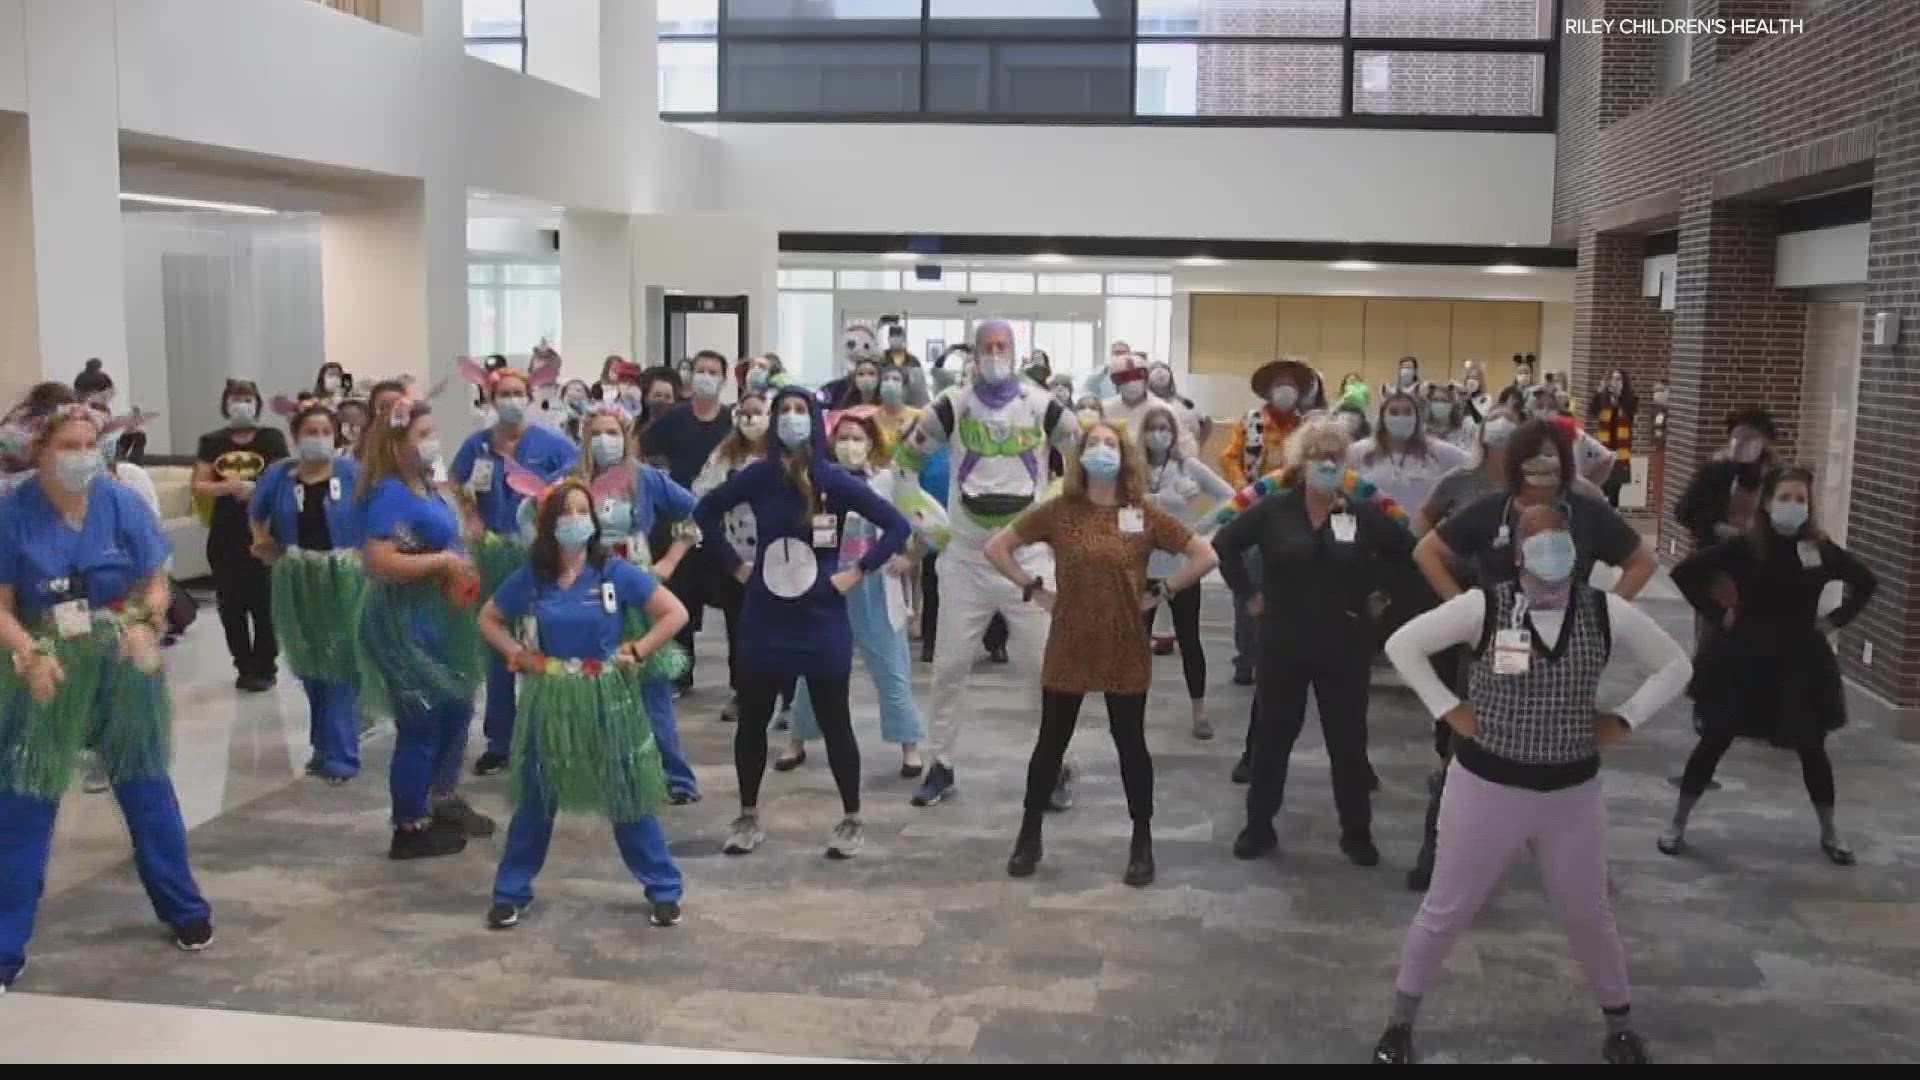 Riley Hospital for Children team members gathered Friday to showcase their dance skills while in Halloween costumes.